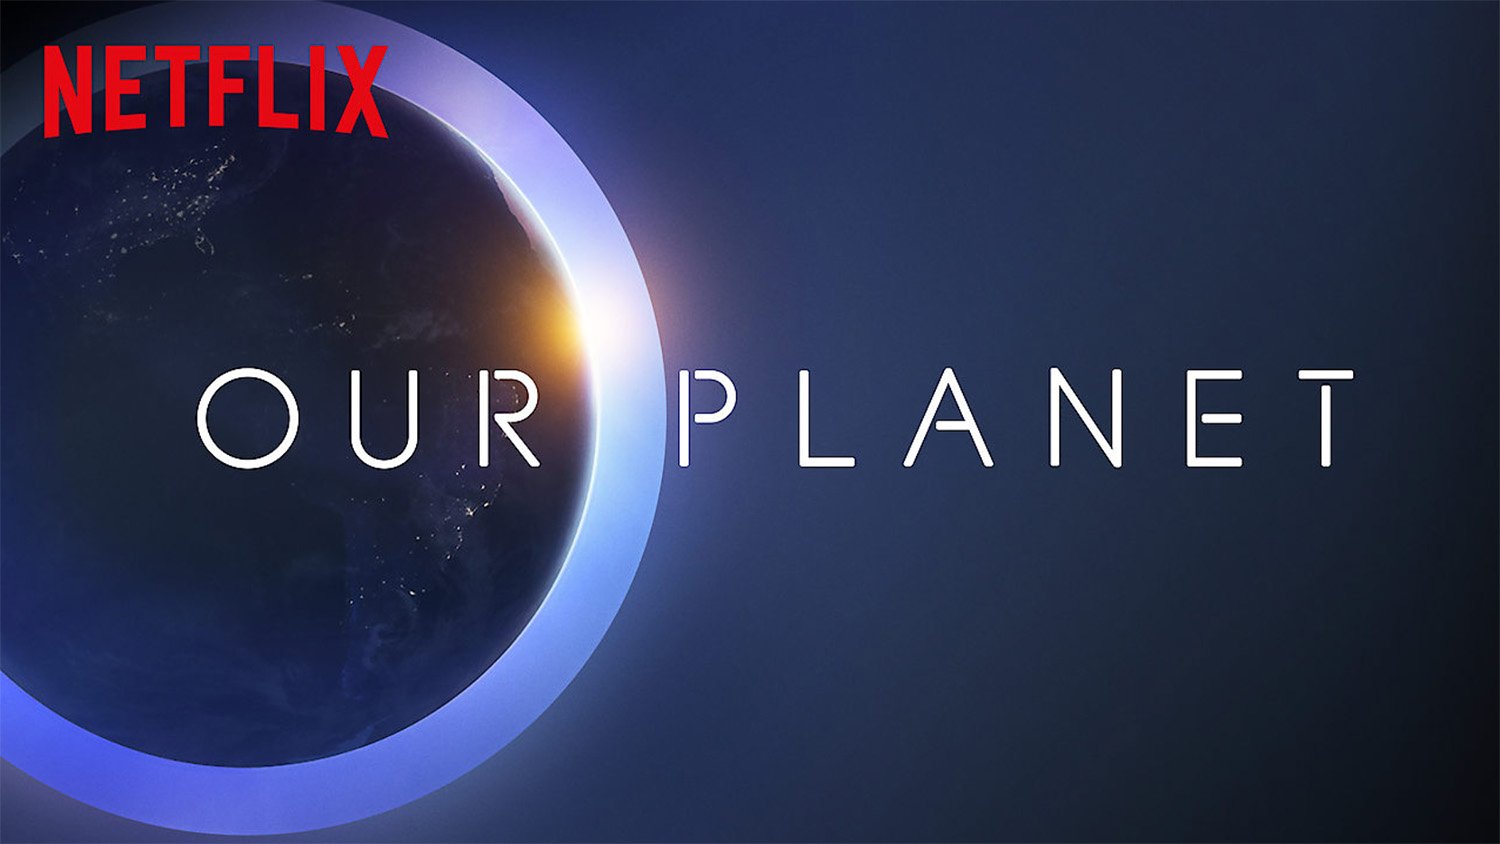 Poster of 'Our Planet' for Netflix.